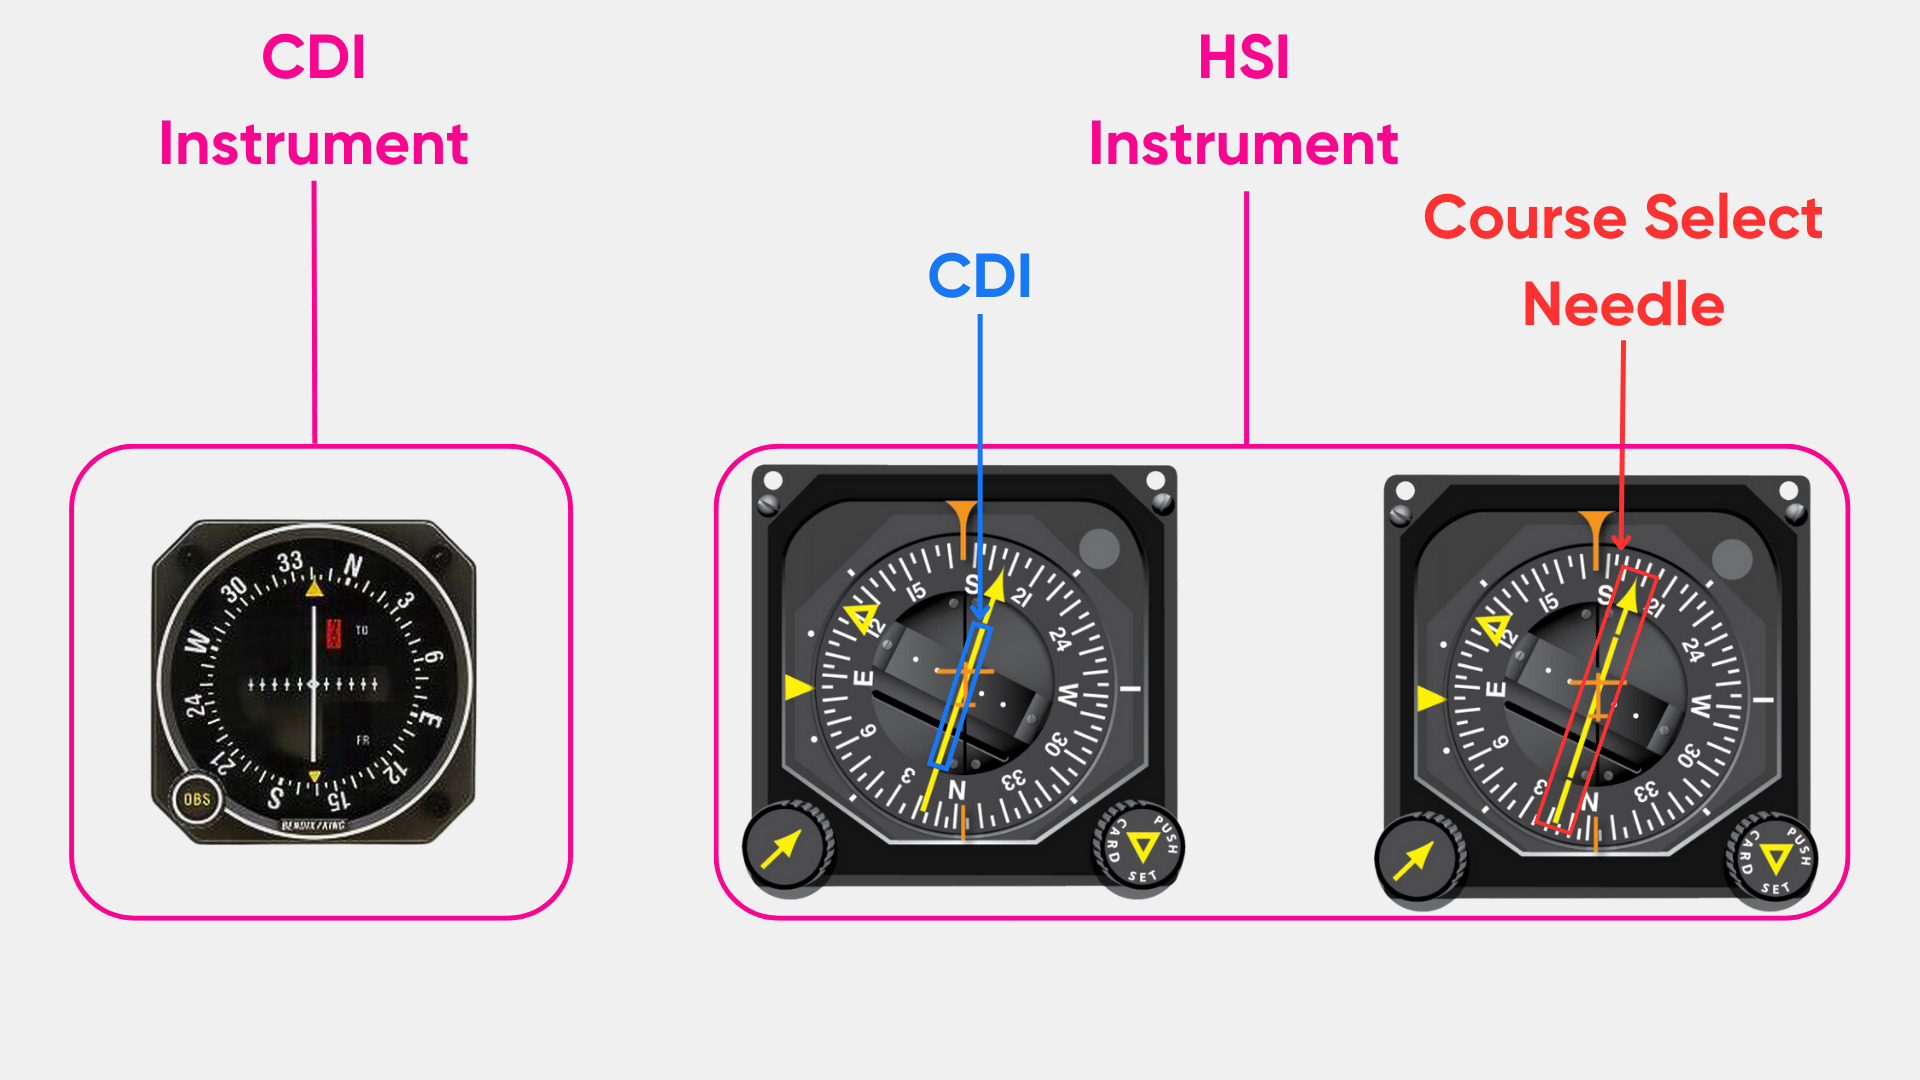 HSI vs. CDI: What’s the Difference?